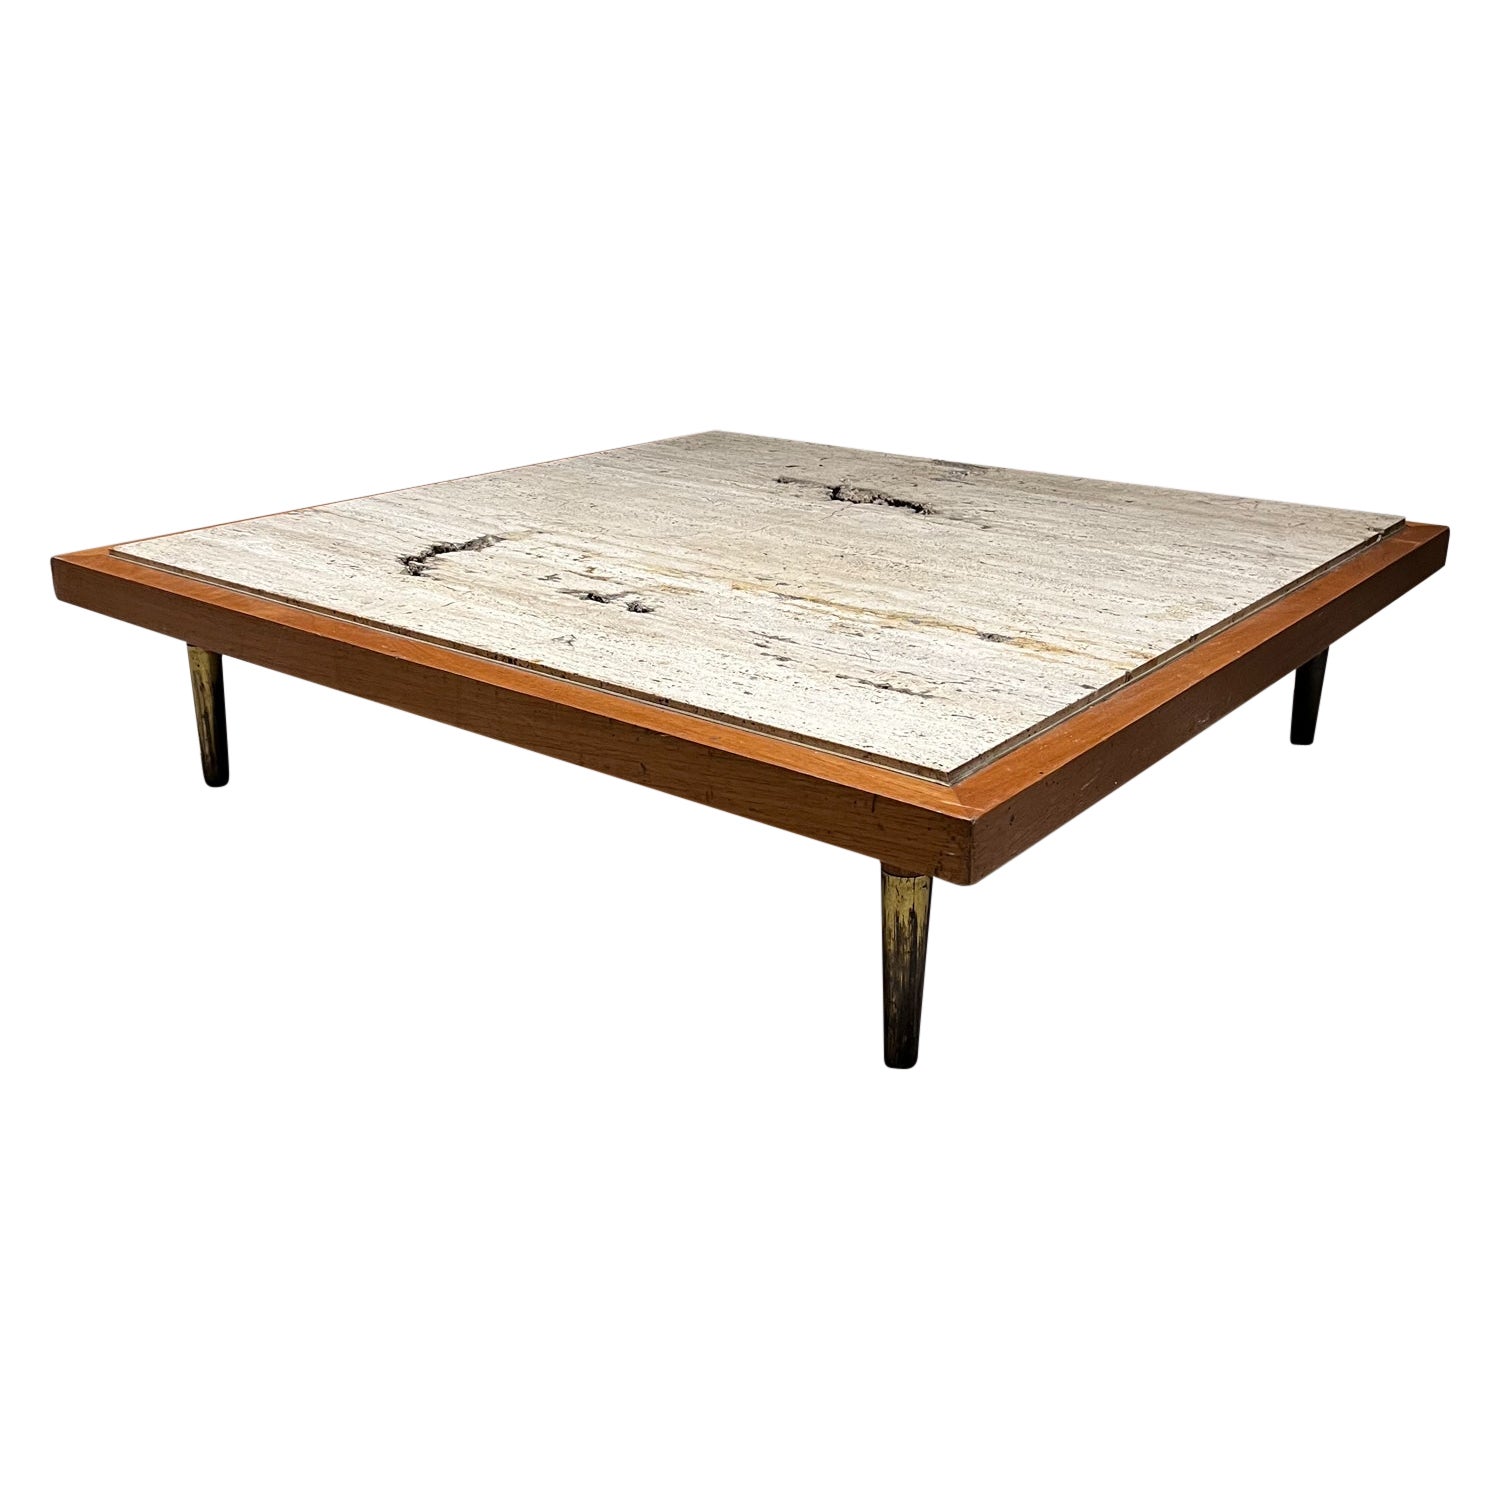 1960s Low Profile Square Coffee Table Travertine and Mahogany  For Sale